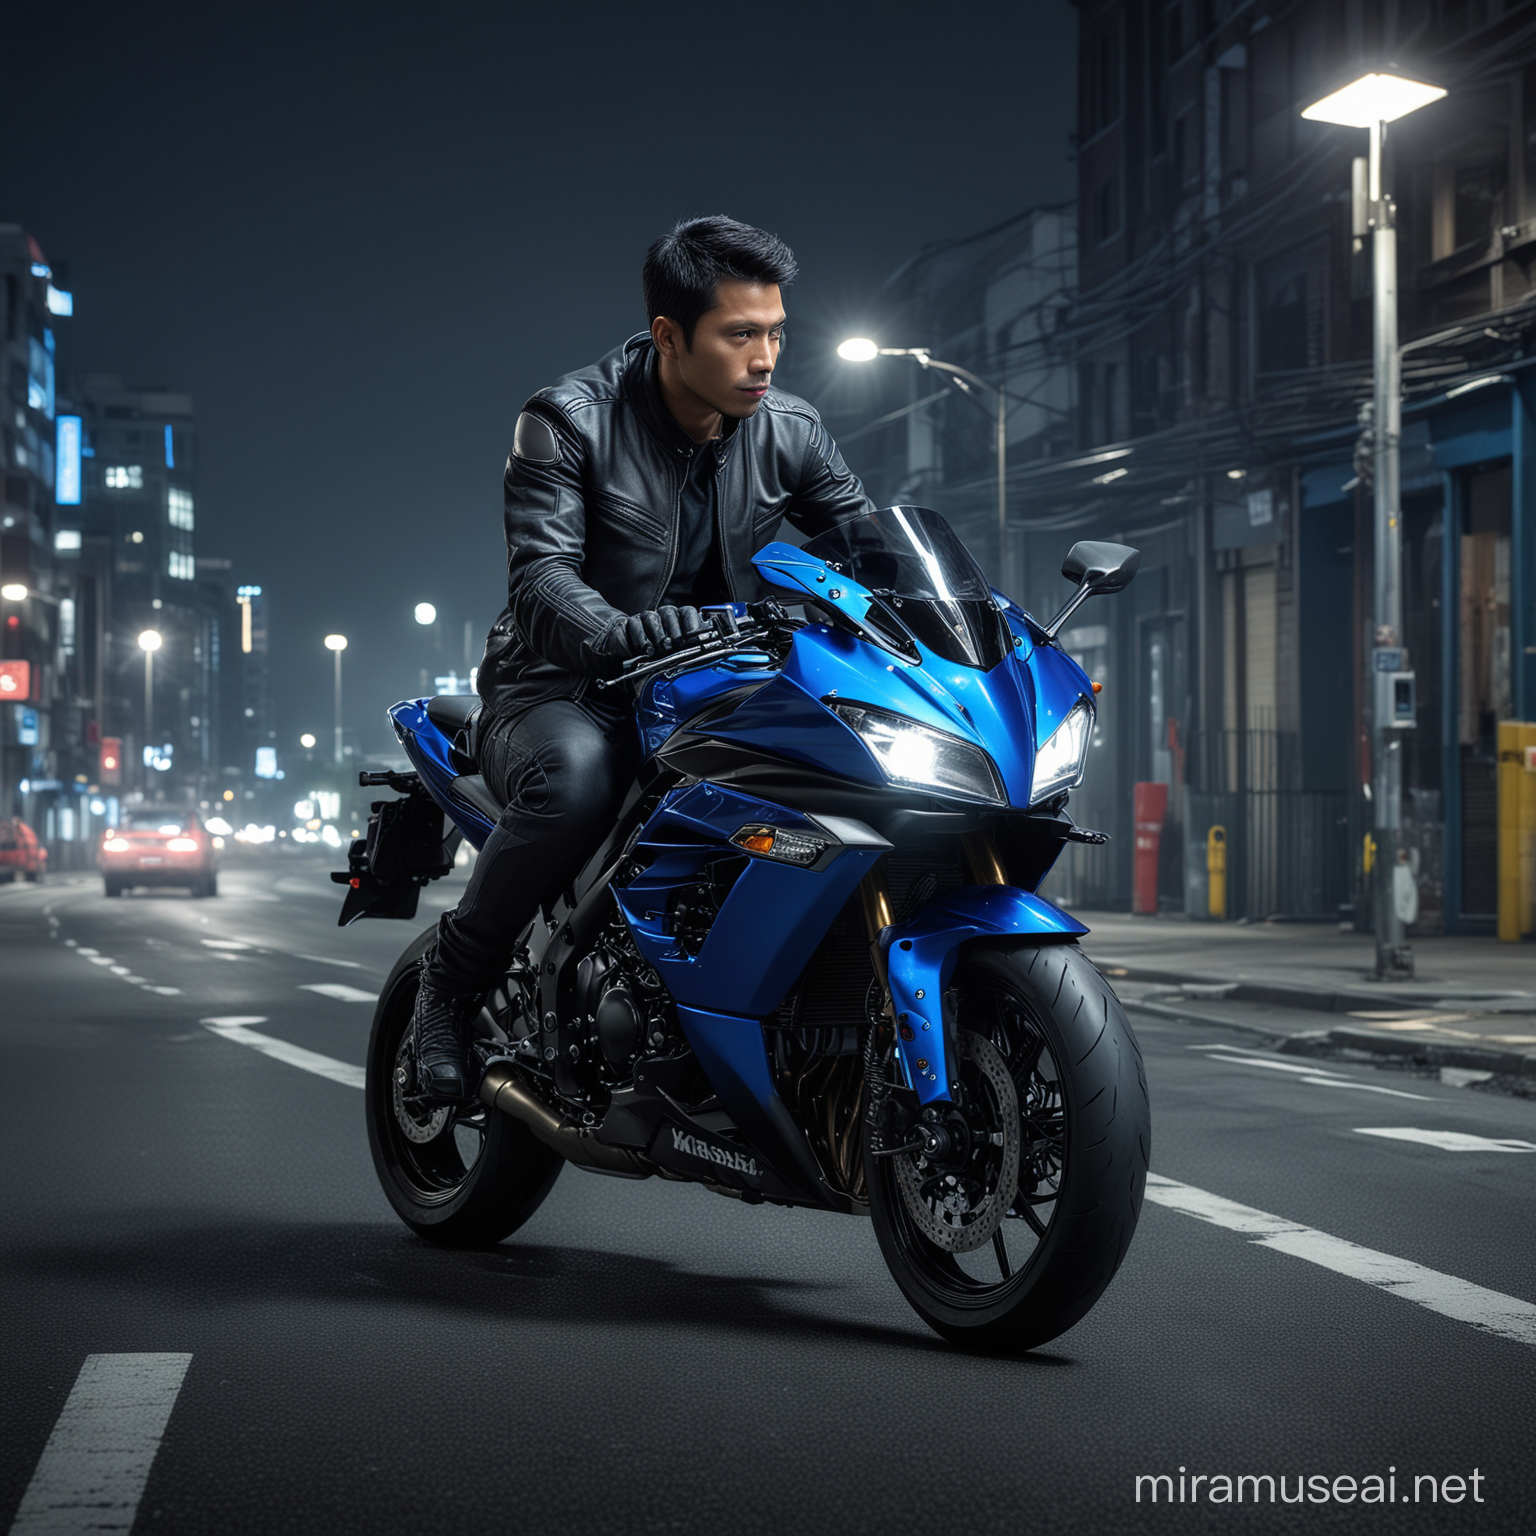 create realistic image a handsome Indonesian man sitting pose on a sleek, blue Kawasaki Ninja 1000RR sports motorcycle at night. The individual wears a black leather jacket, adding to the urban and modern aesthetic of the scene. The motorcycle’s vibrant blue color stands out against the dark background. Ambient city lights illuminate the surroundings, creating contrasts of light and shadow, 800mm lens, realistic, hyperrealistic, photography, professional photography, deep photography, ultra HD, very high quality, best quality, mid quality, HDR photo, focus photo, deep focus, very detailed, original photo, original photo, ultra sharp, nature photo, masterpiece, award winning, shot with Hasselblad X2D